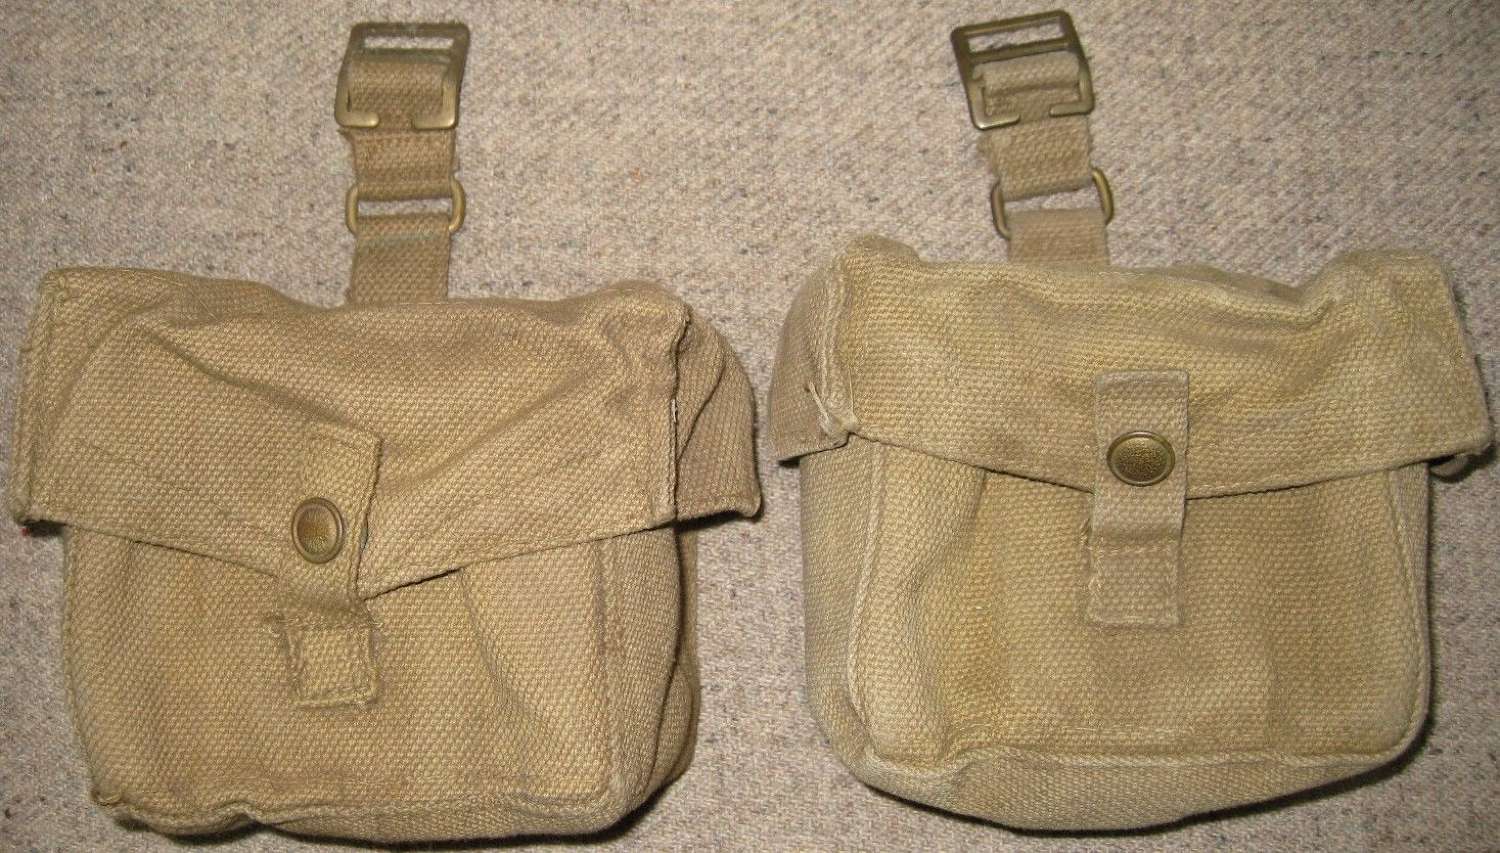 A PAIR OF HOME GUARD AMMO POUCHES PART OF THE HOME GAURD WEBBING SET